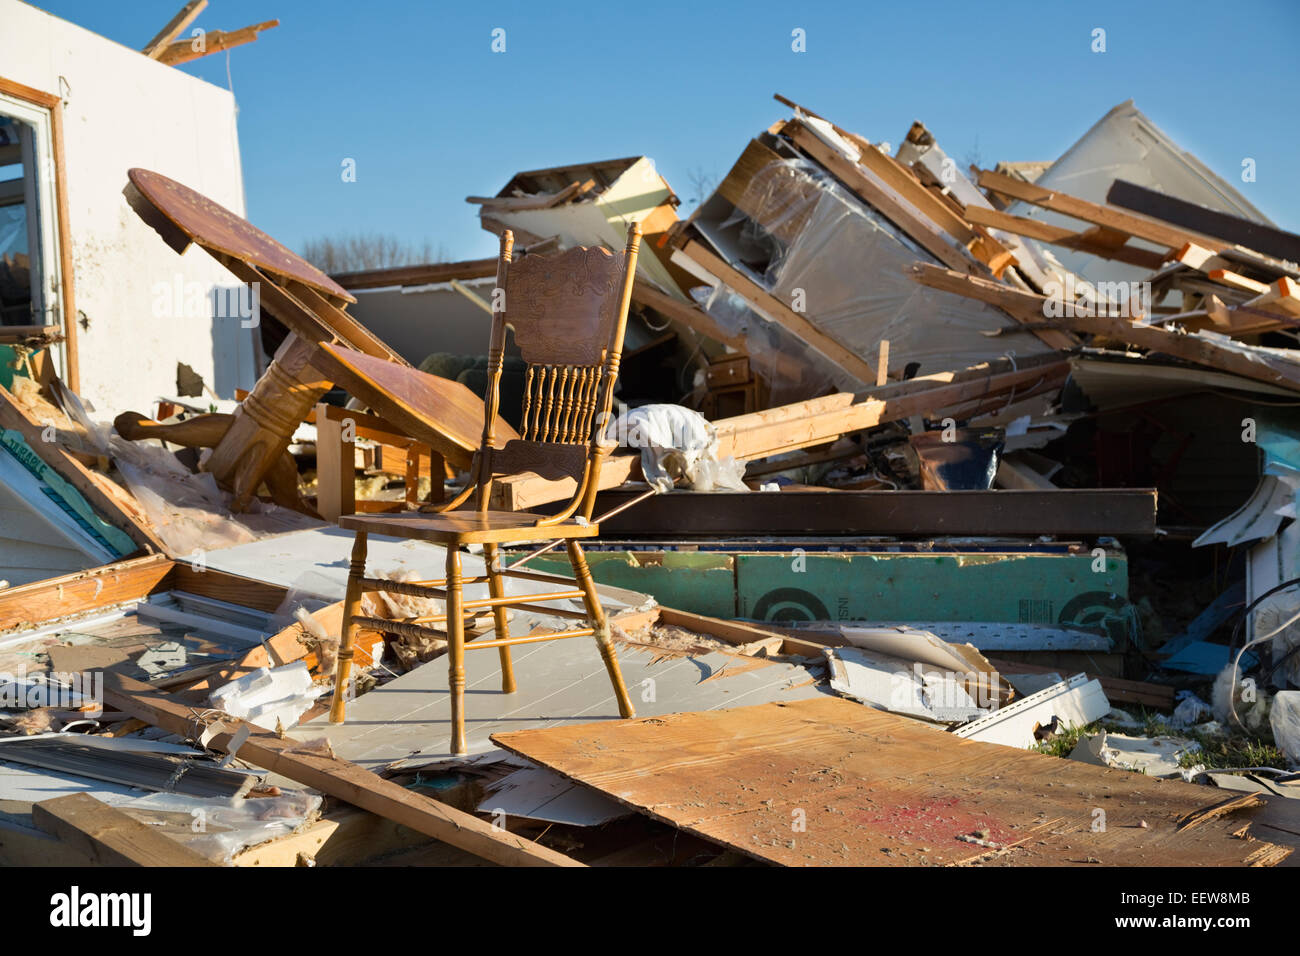 House destroyed by tornado Stock Photo